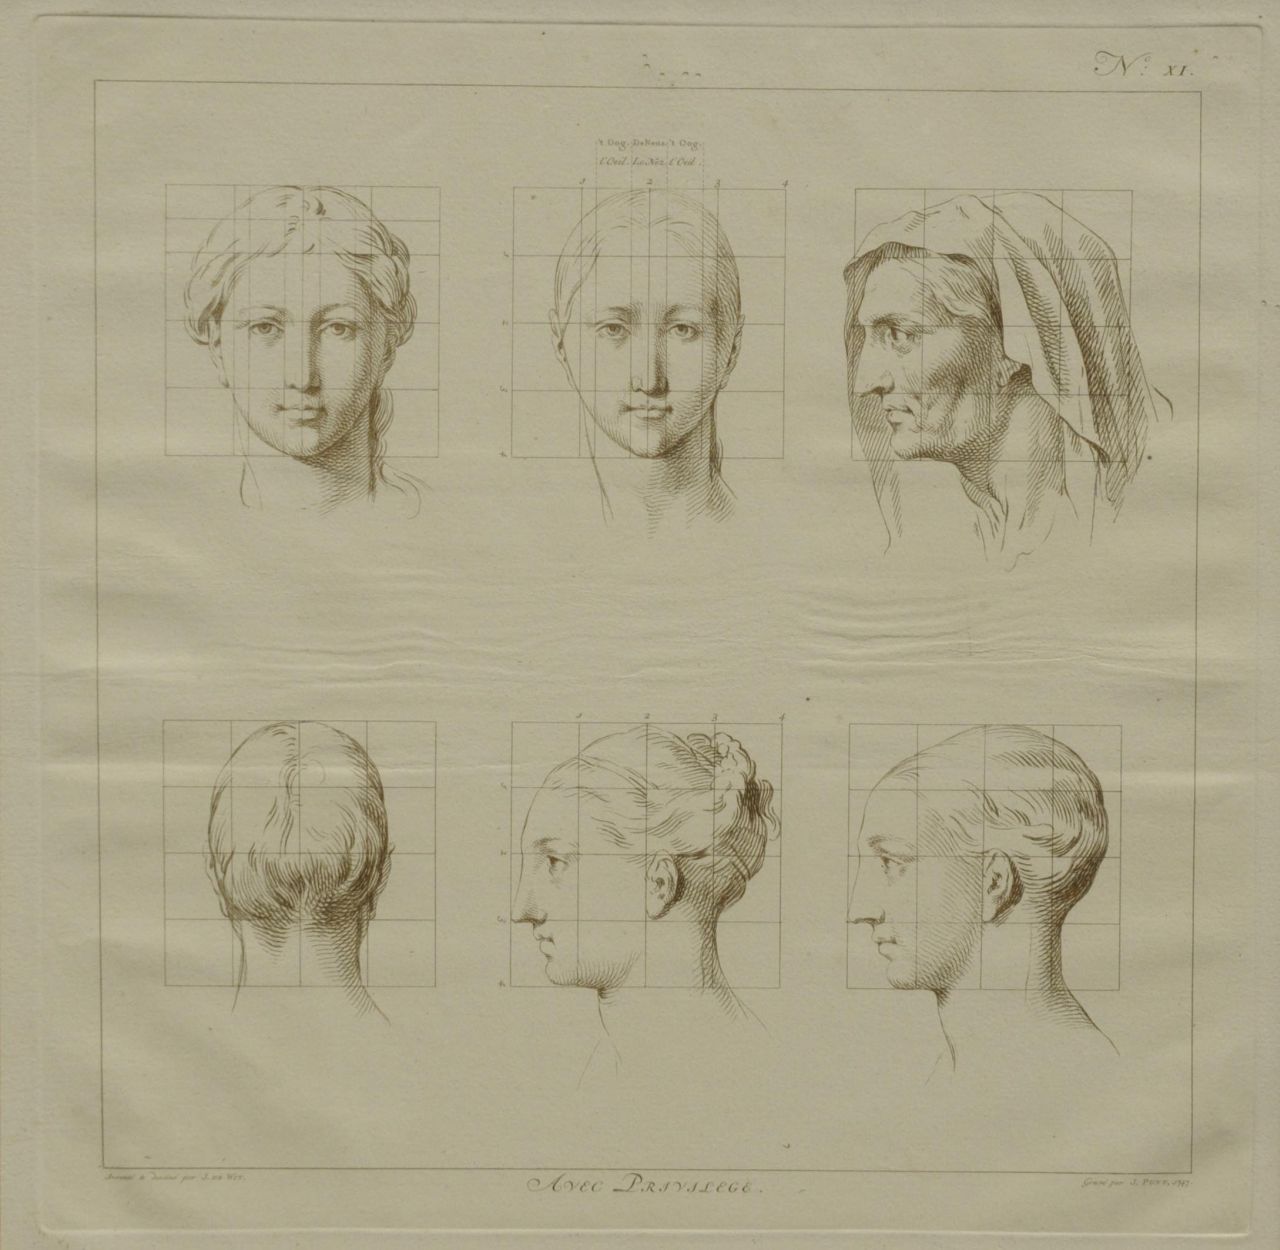 Wit J. de | Jacob de Wit, The ideal proportions of the human body - Head of a woman (no.XI), etching on paper 40.0 x 40.0 cm